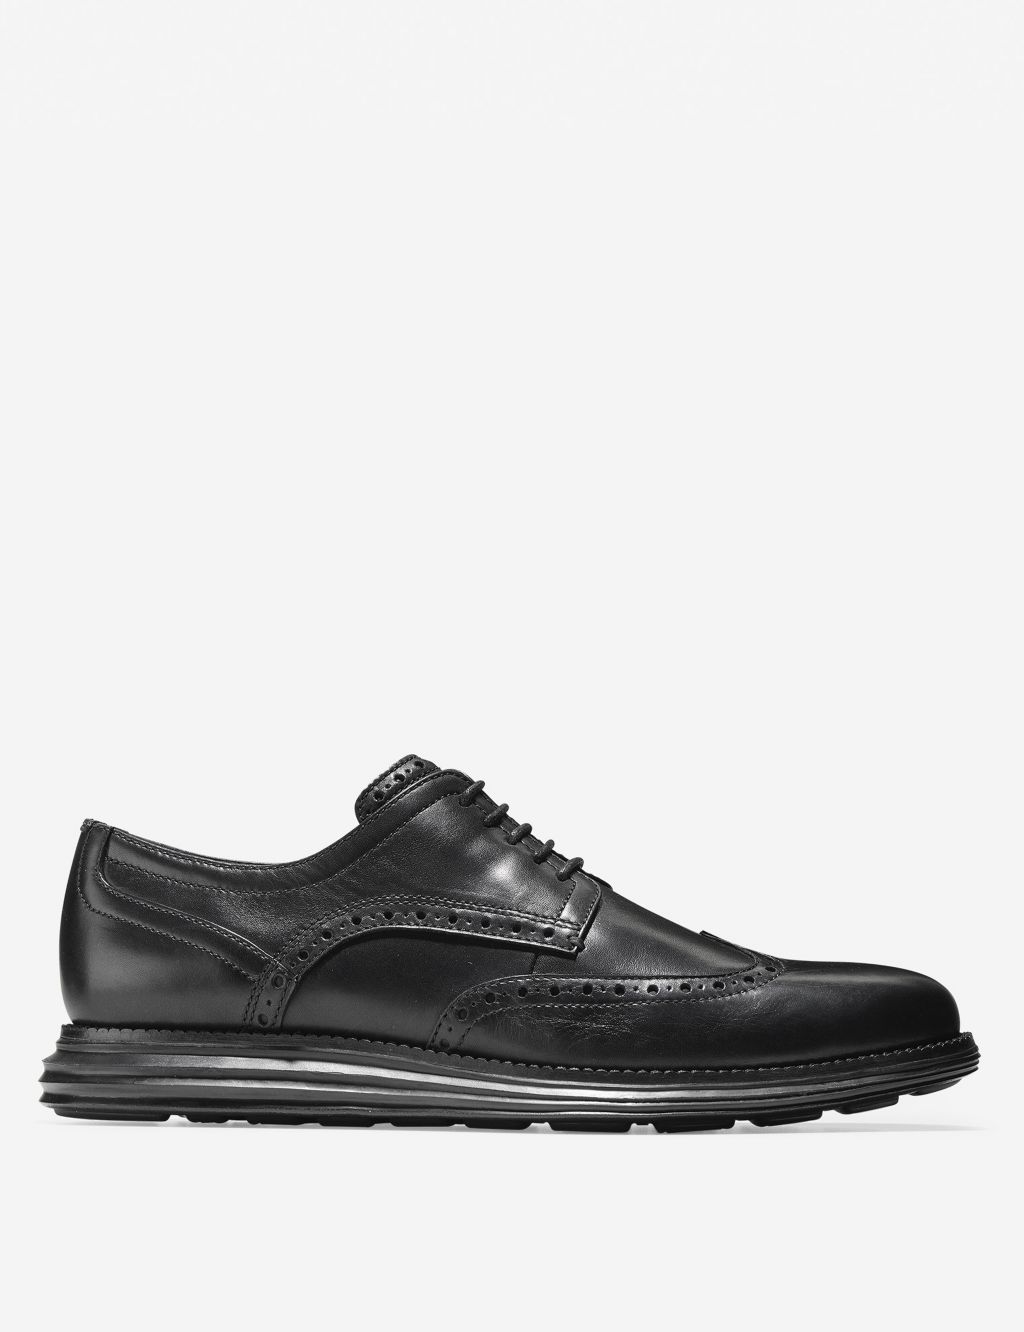 Originalgrand Leather Oxford Shoes | Cole Haan | M&S